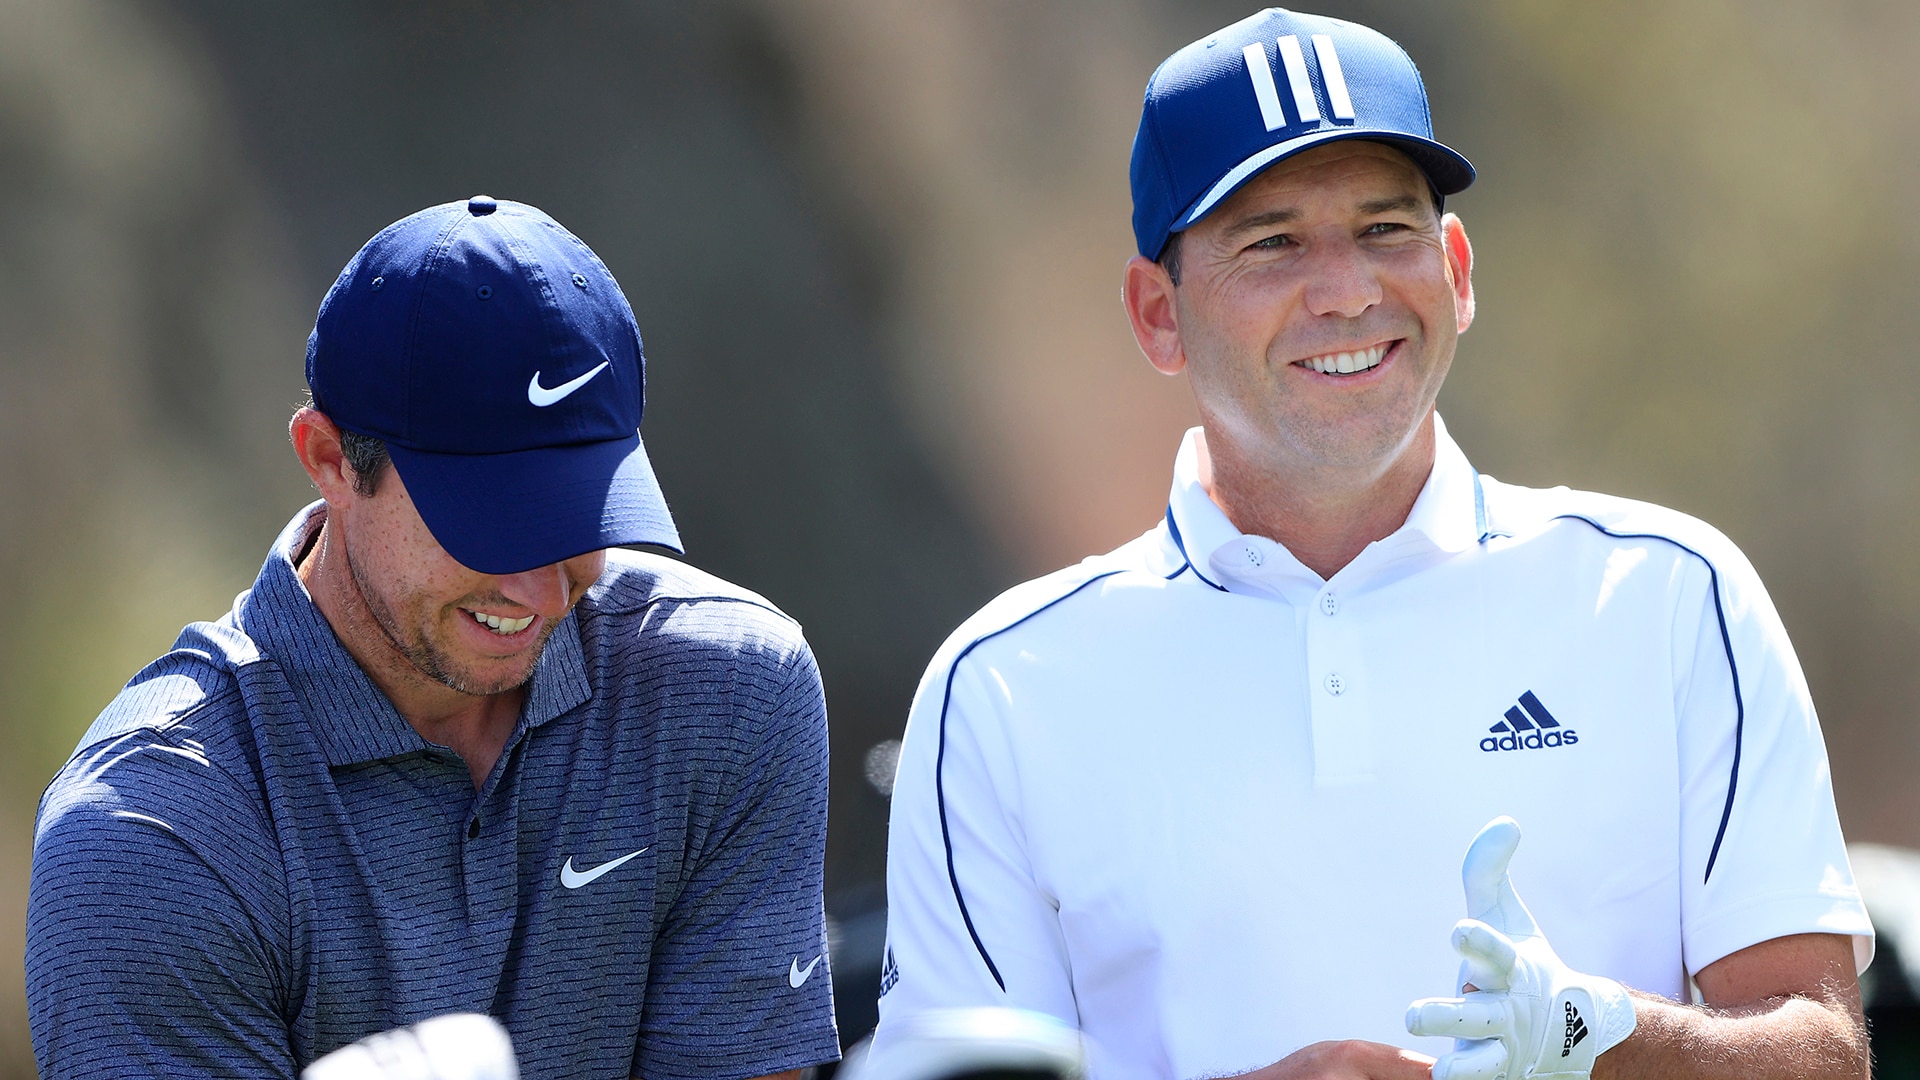 Rory McIlroy-Sergio Garcia Feud Appears to be Over